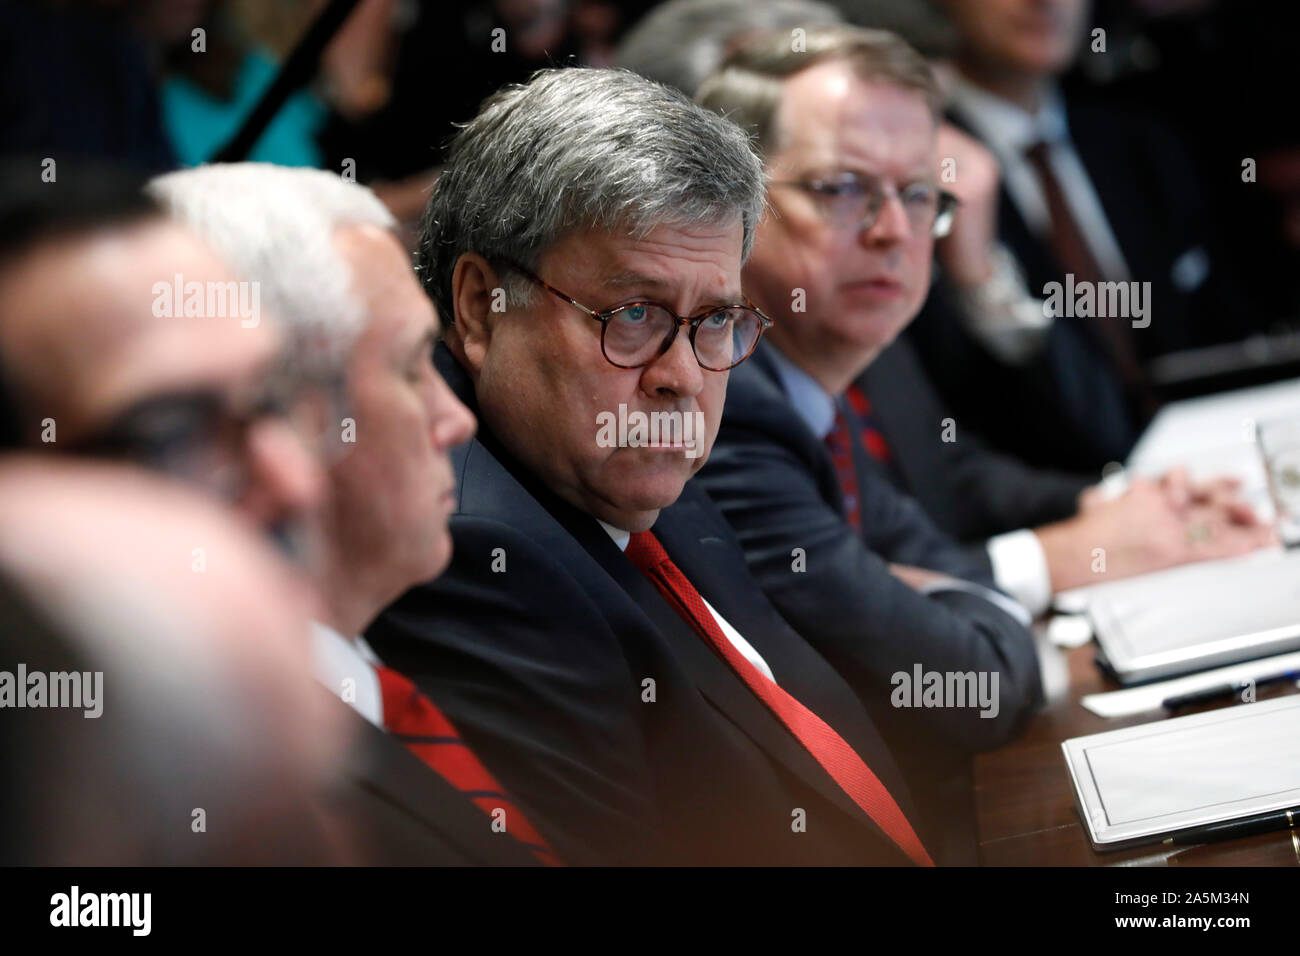 Washington, United States Of America. 21st Oct, 2019. United States Attorney General William P. Barr attends a Cabinet Meeting at the White House in Washington, DC on October 21, 2019. Credit: Yuri Gripas/Pool via CNP | usage worldwide Credit: dpa/Alamy Live News Stock Photo